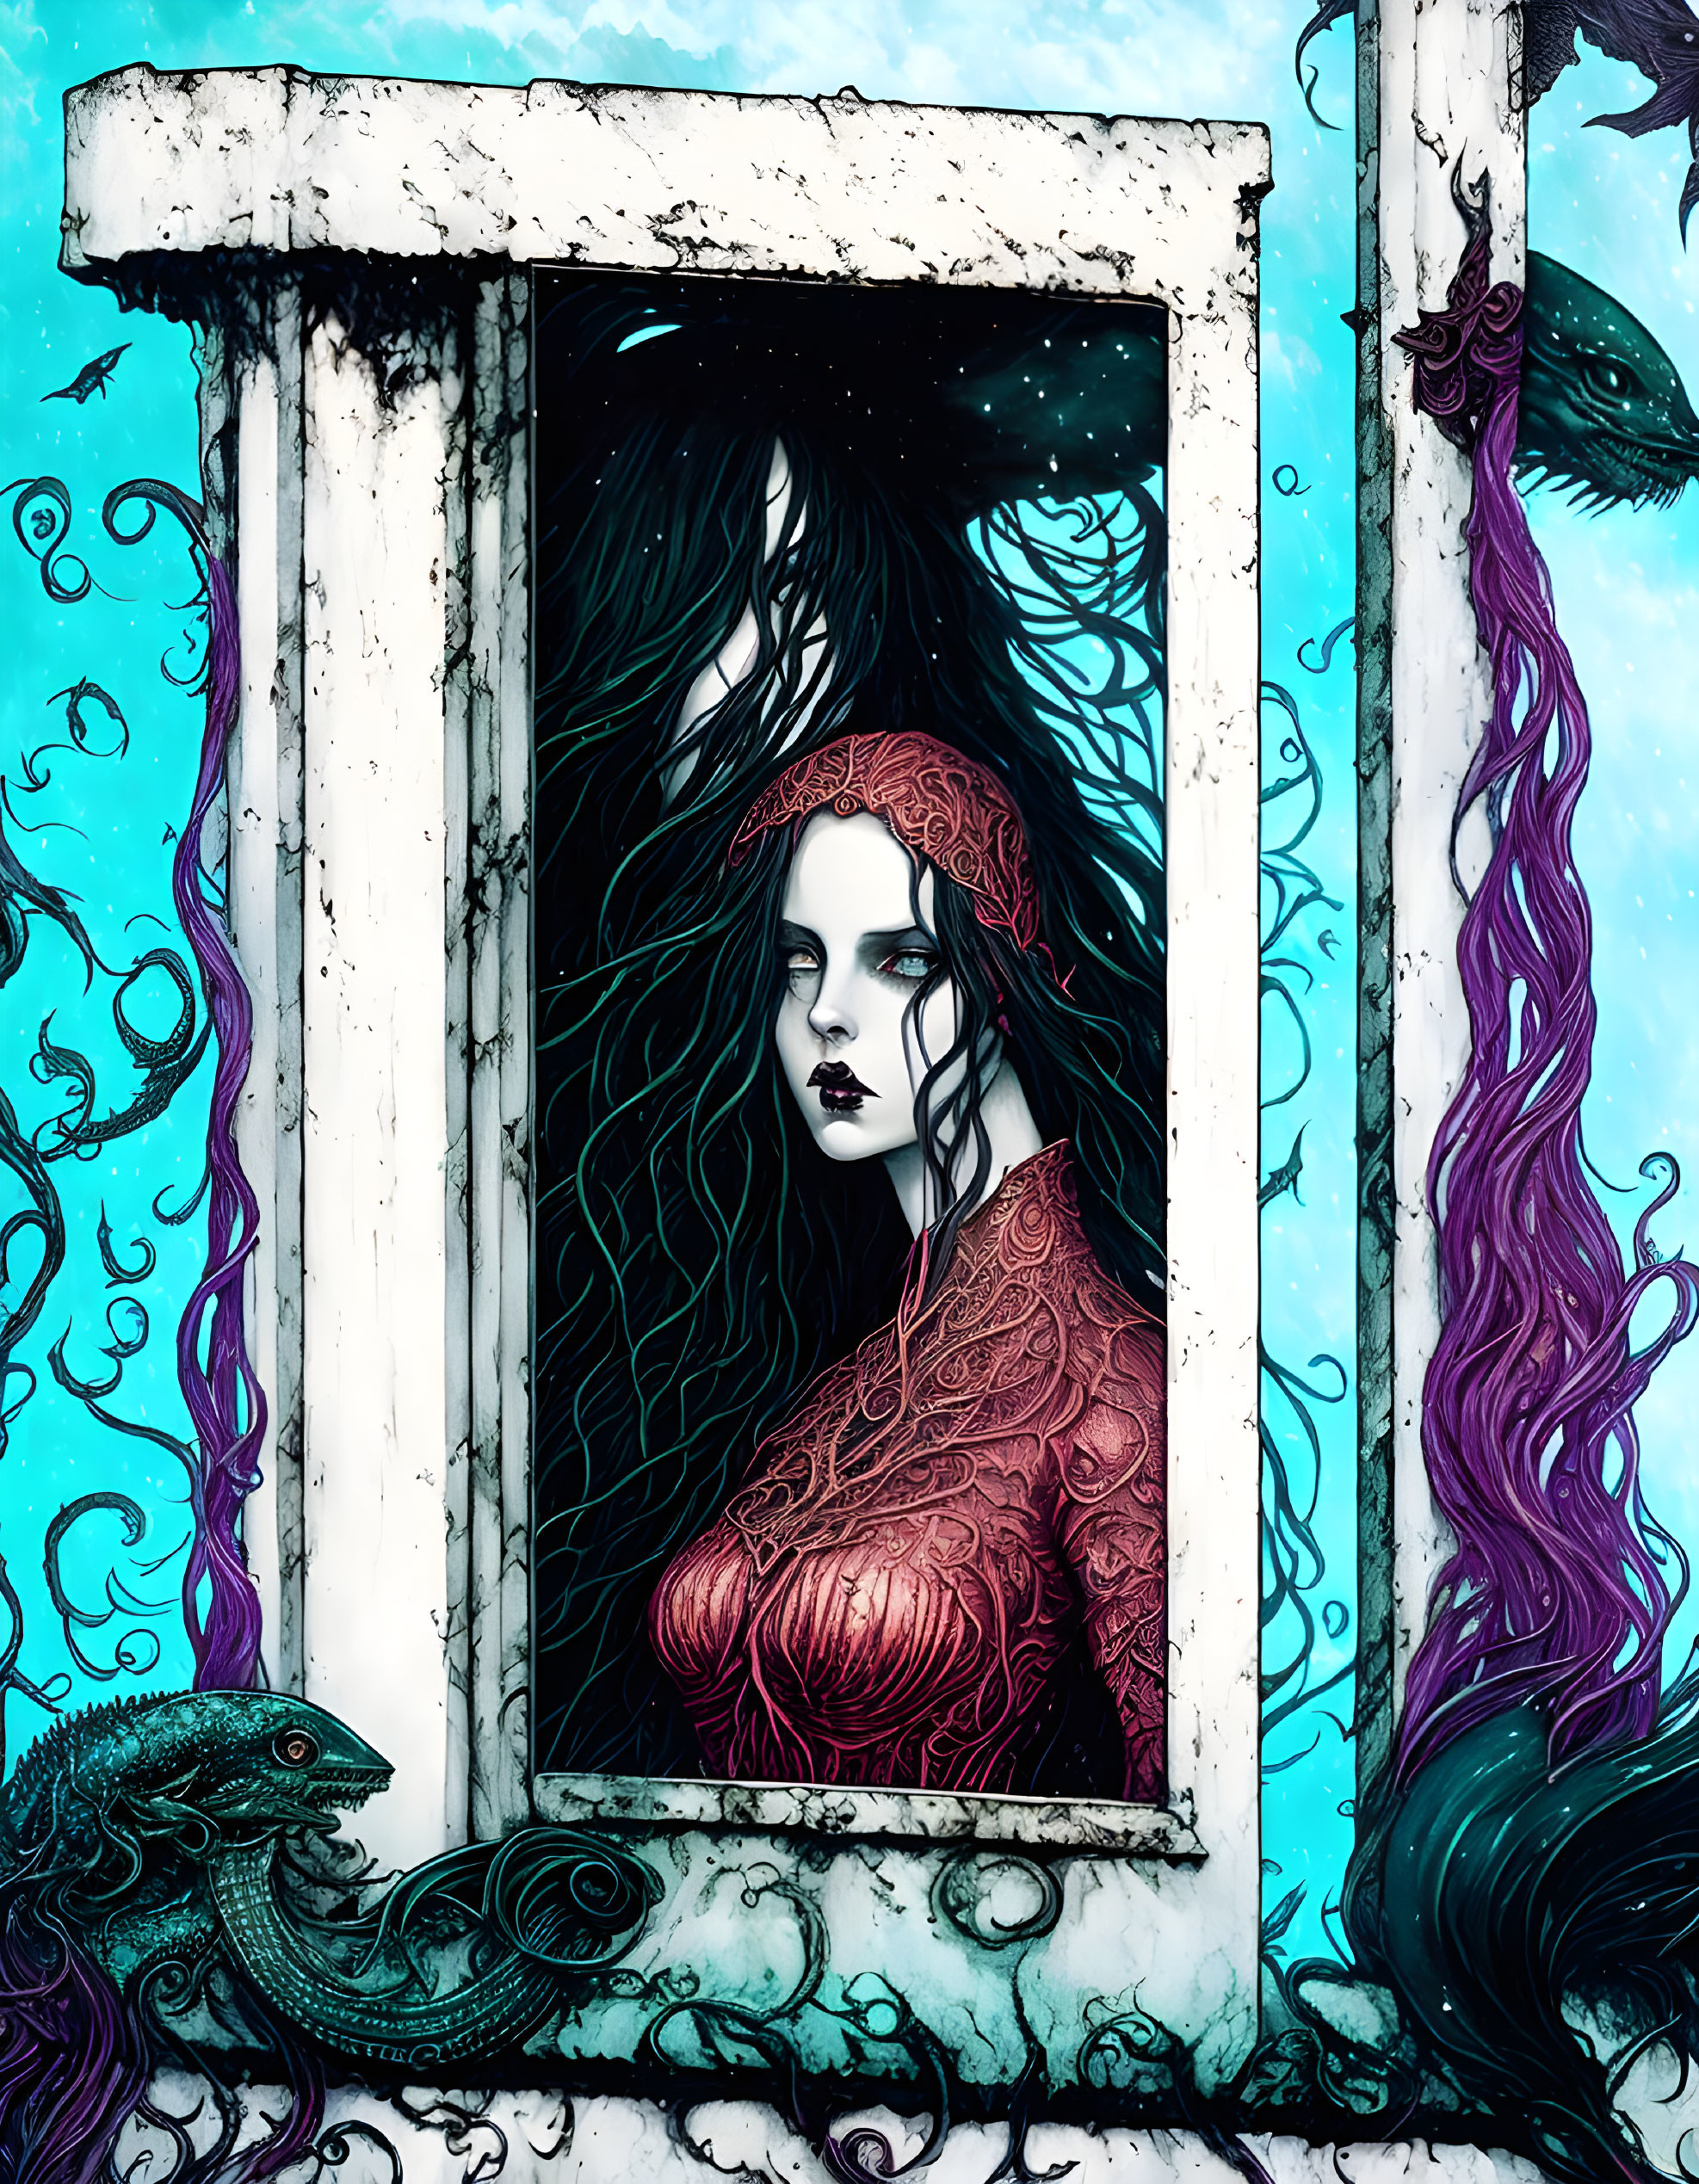 Surreal illustration of woman with black hair and red attire in white window with blue tentacles